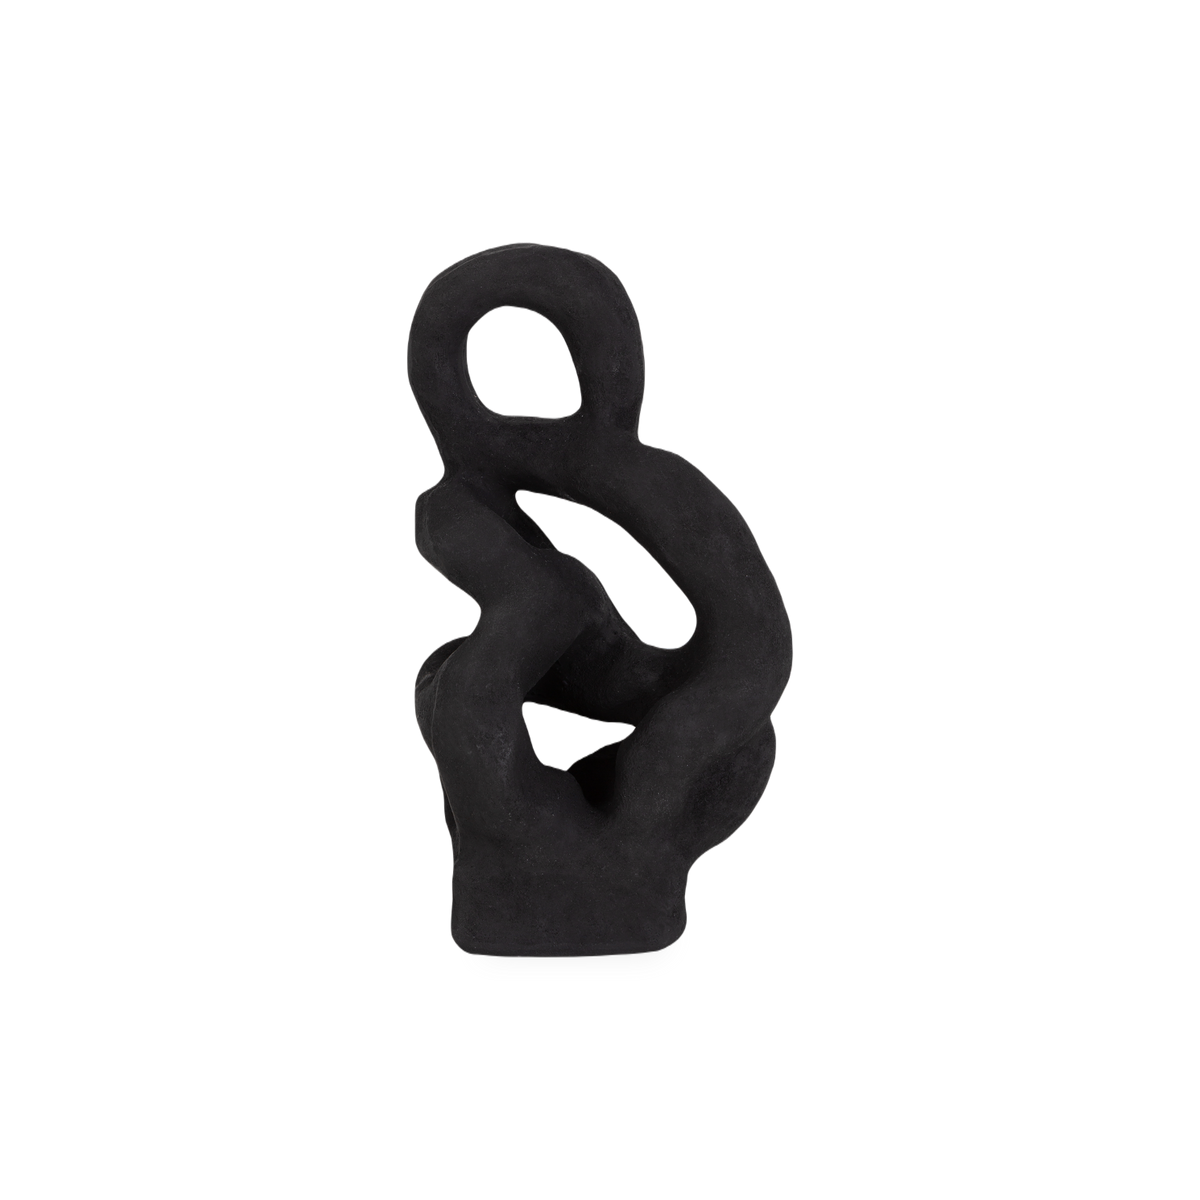 Dynamically formed and wonderfully abstract, the Stone Resin Sculpture captivates every viewer with its unpredictable yet natural curves.